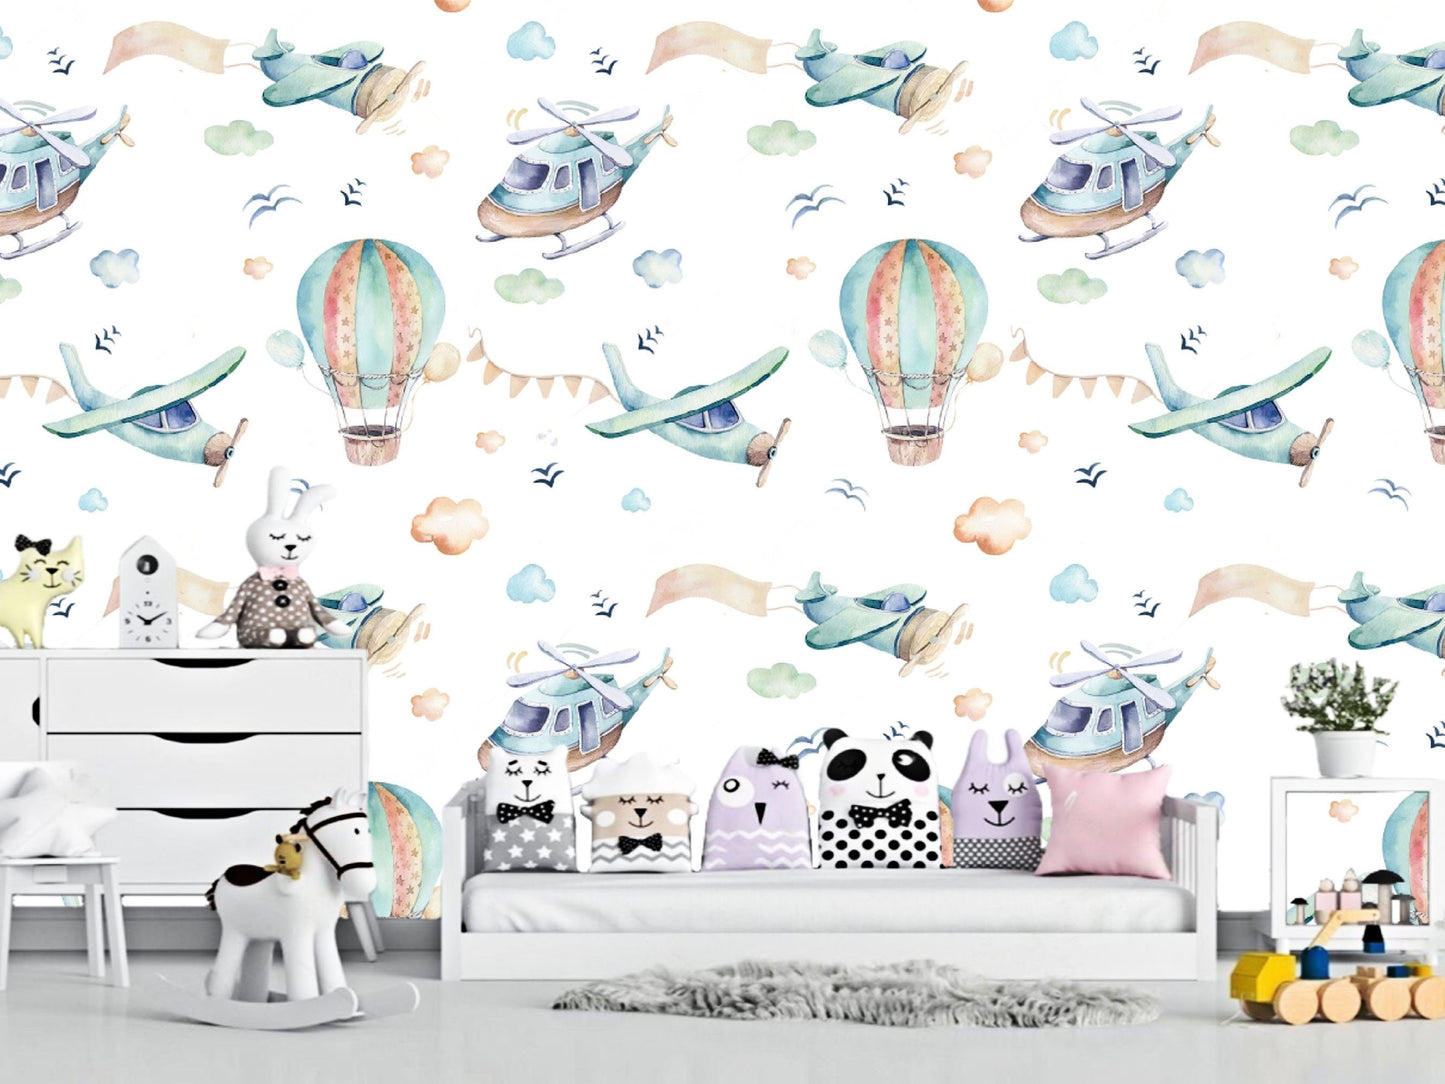 Playful Balloon and Airplane Wallpaper for Nursery Decor